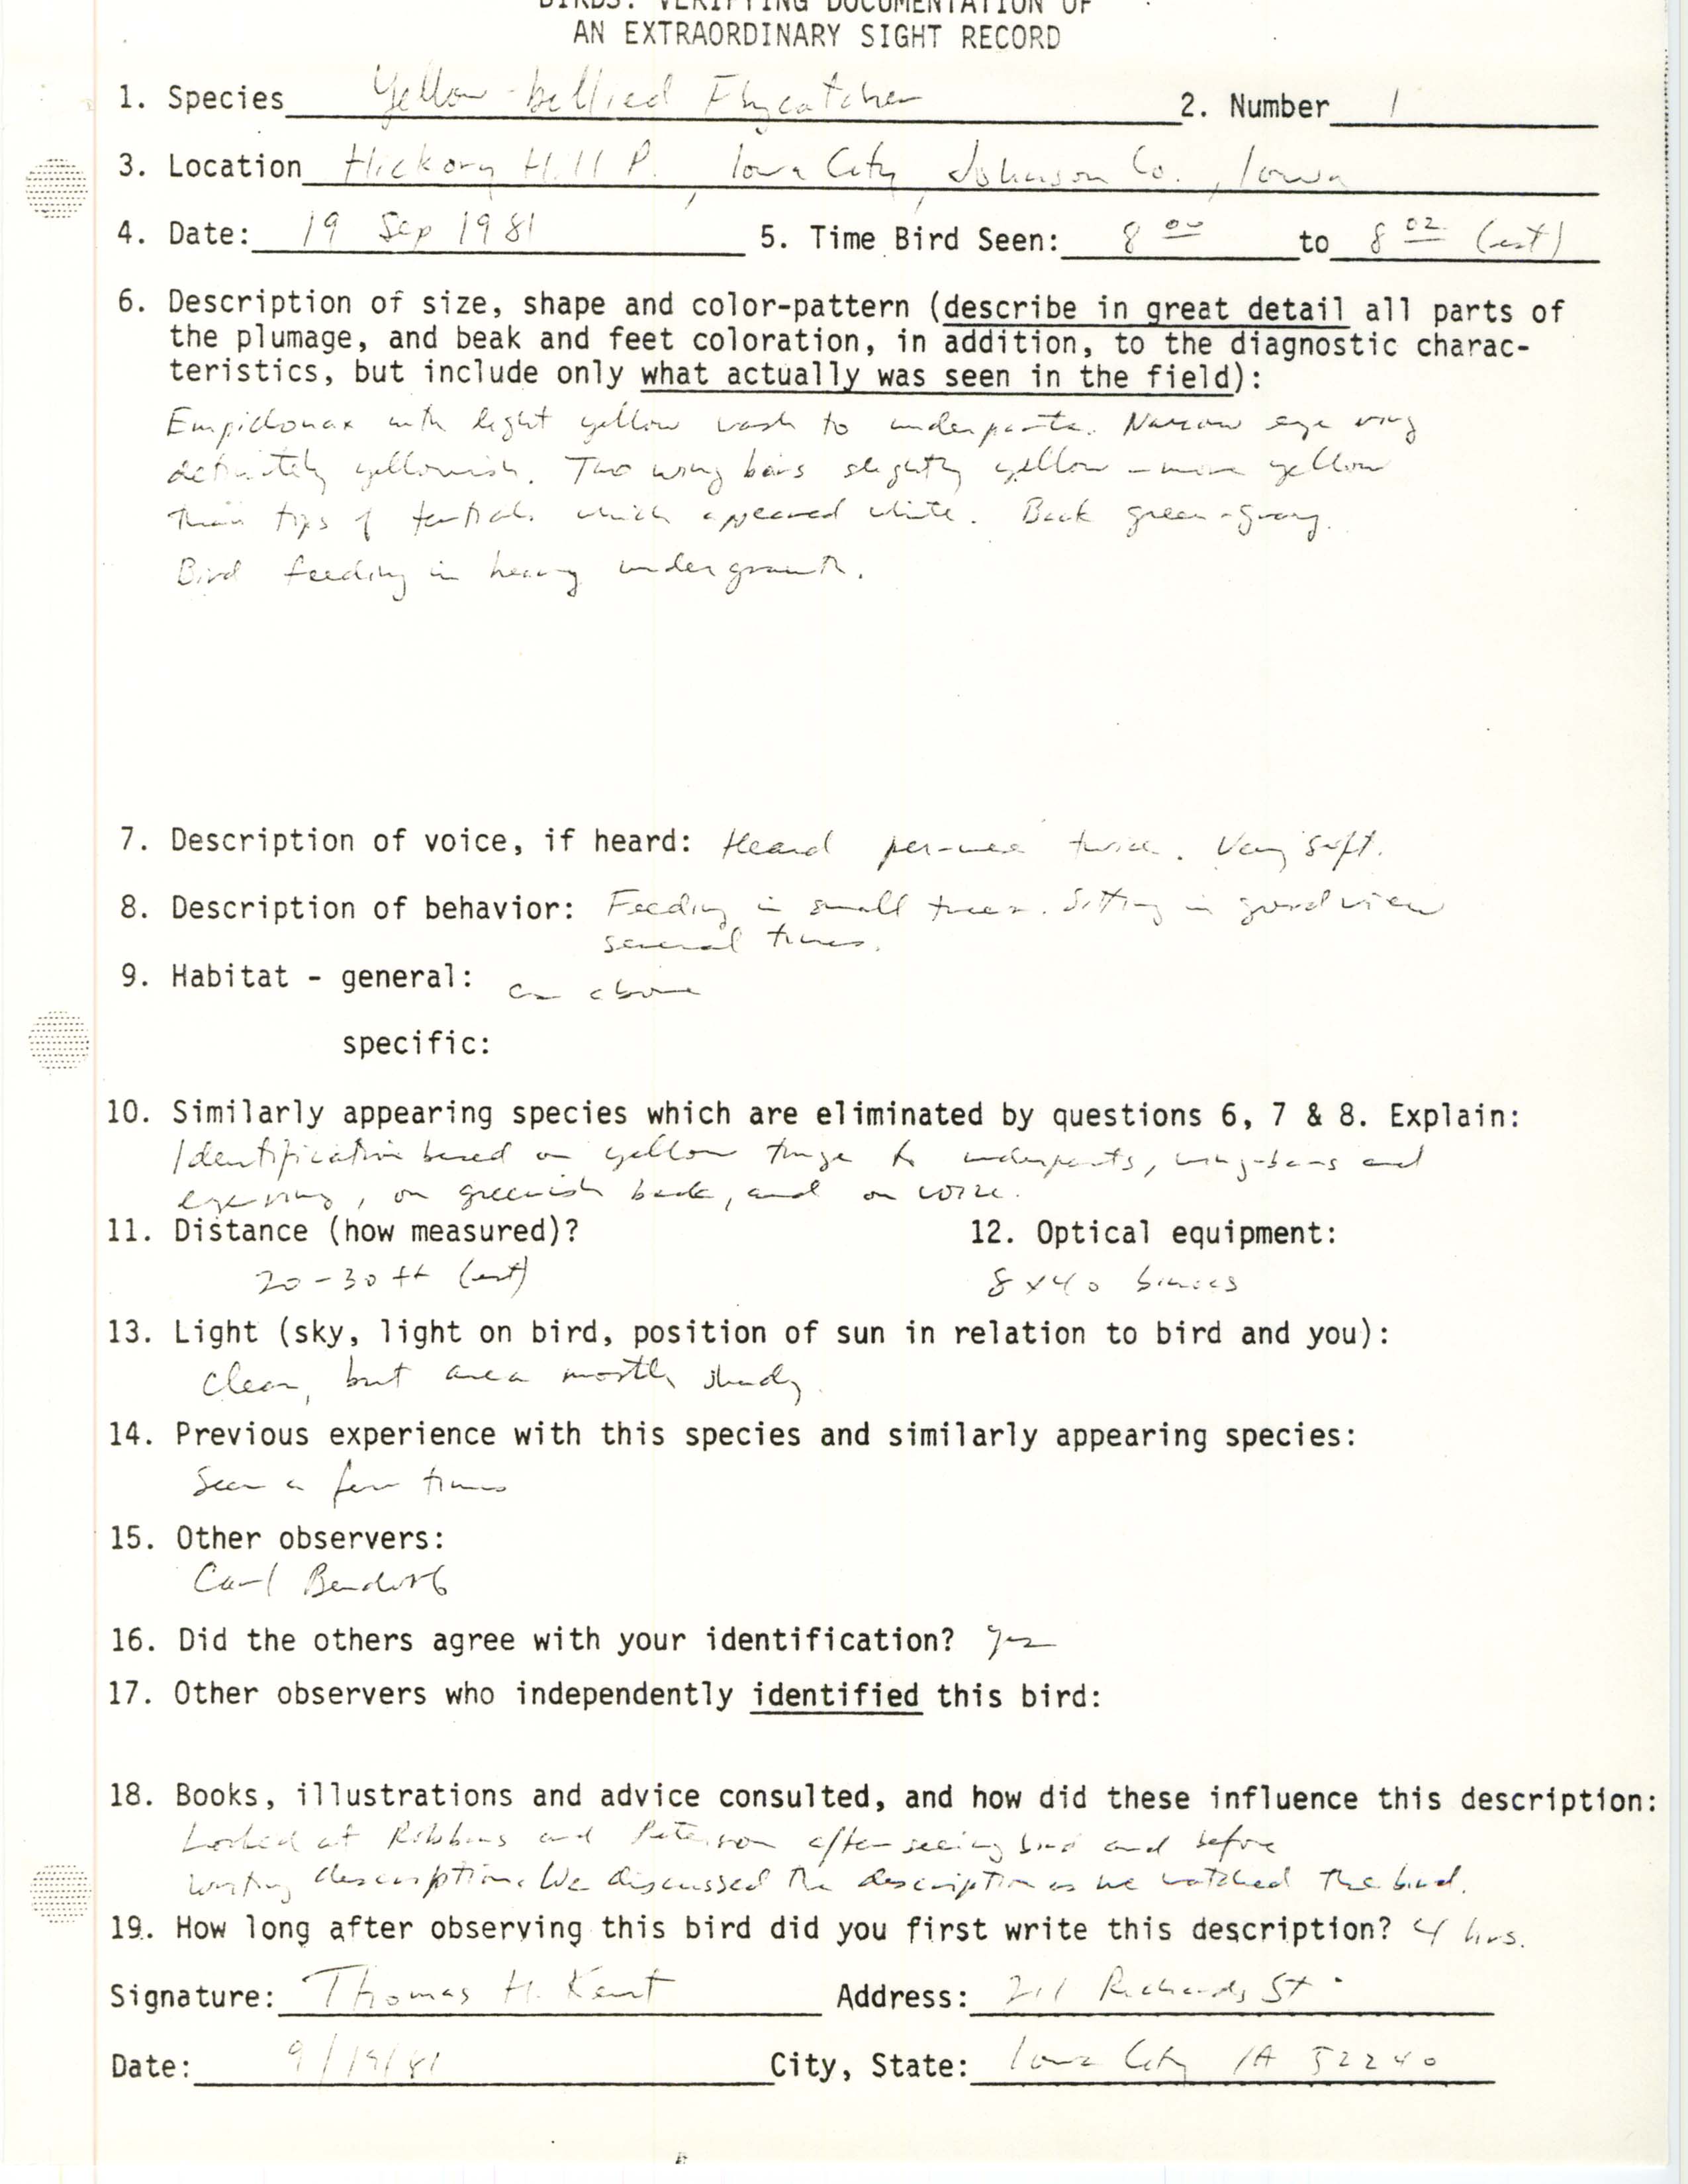 Rare bird documentation form for Yellow-bellied Flycatcher at Hickory Hill Park in 1981